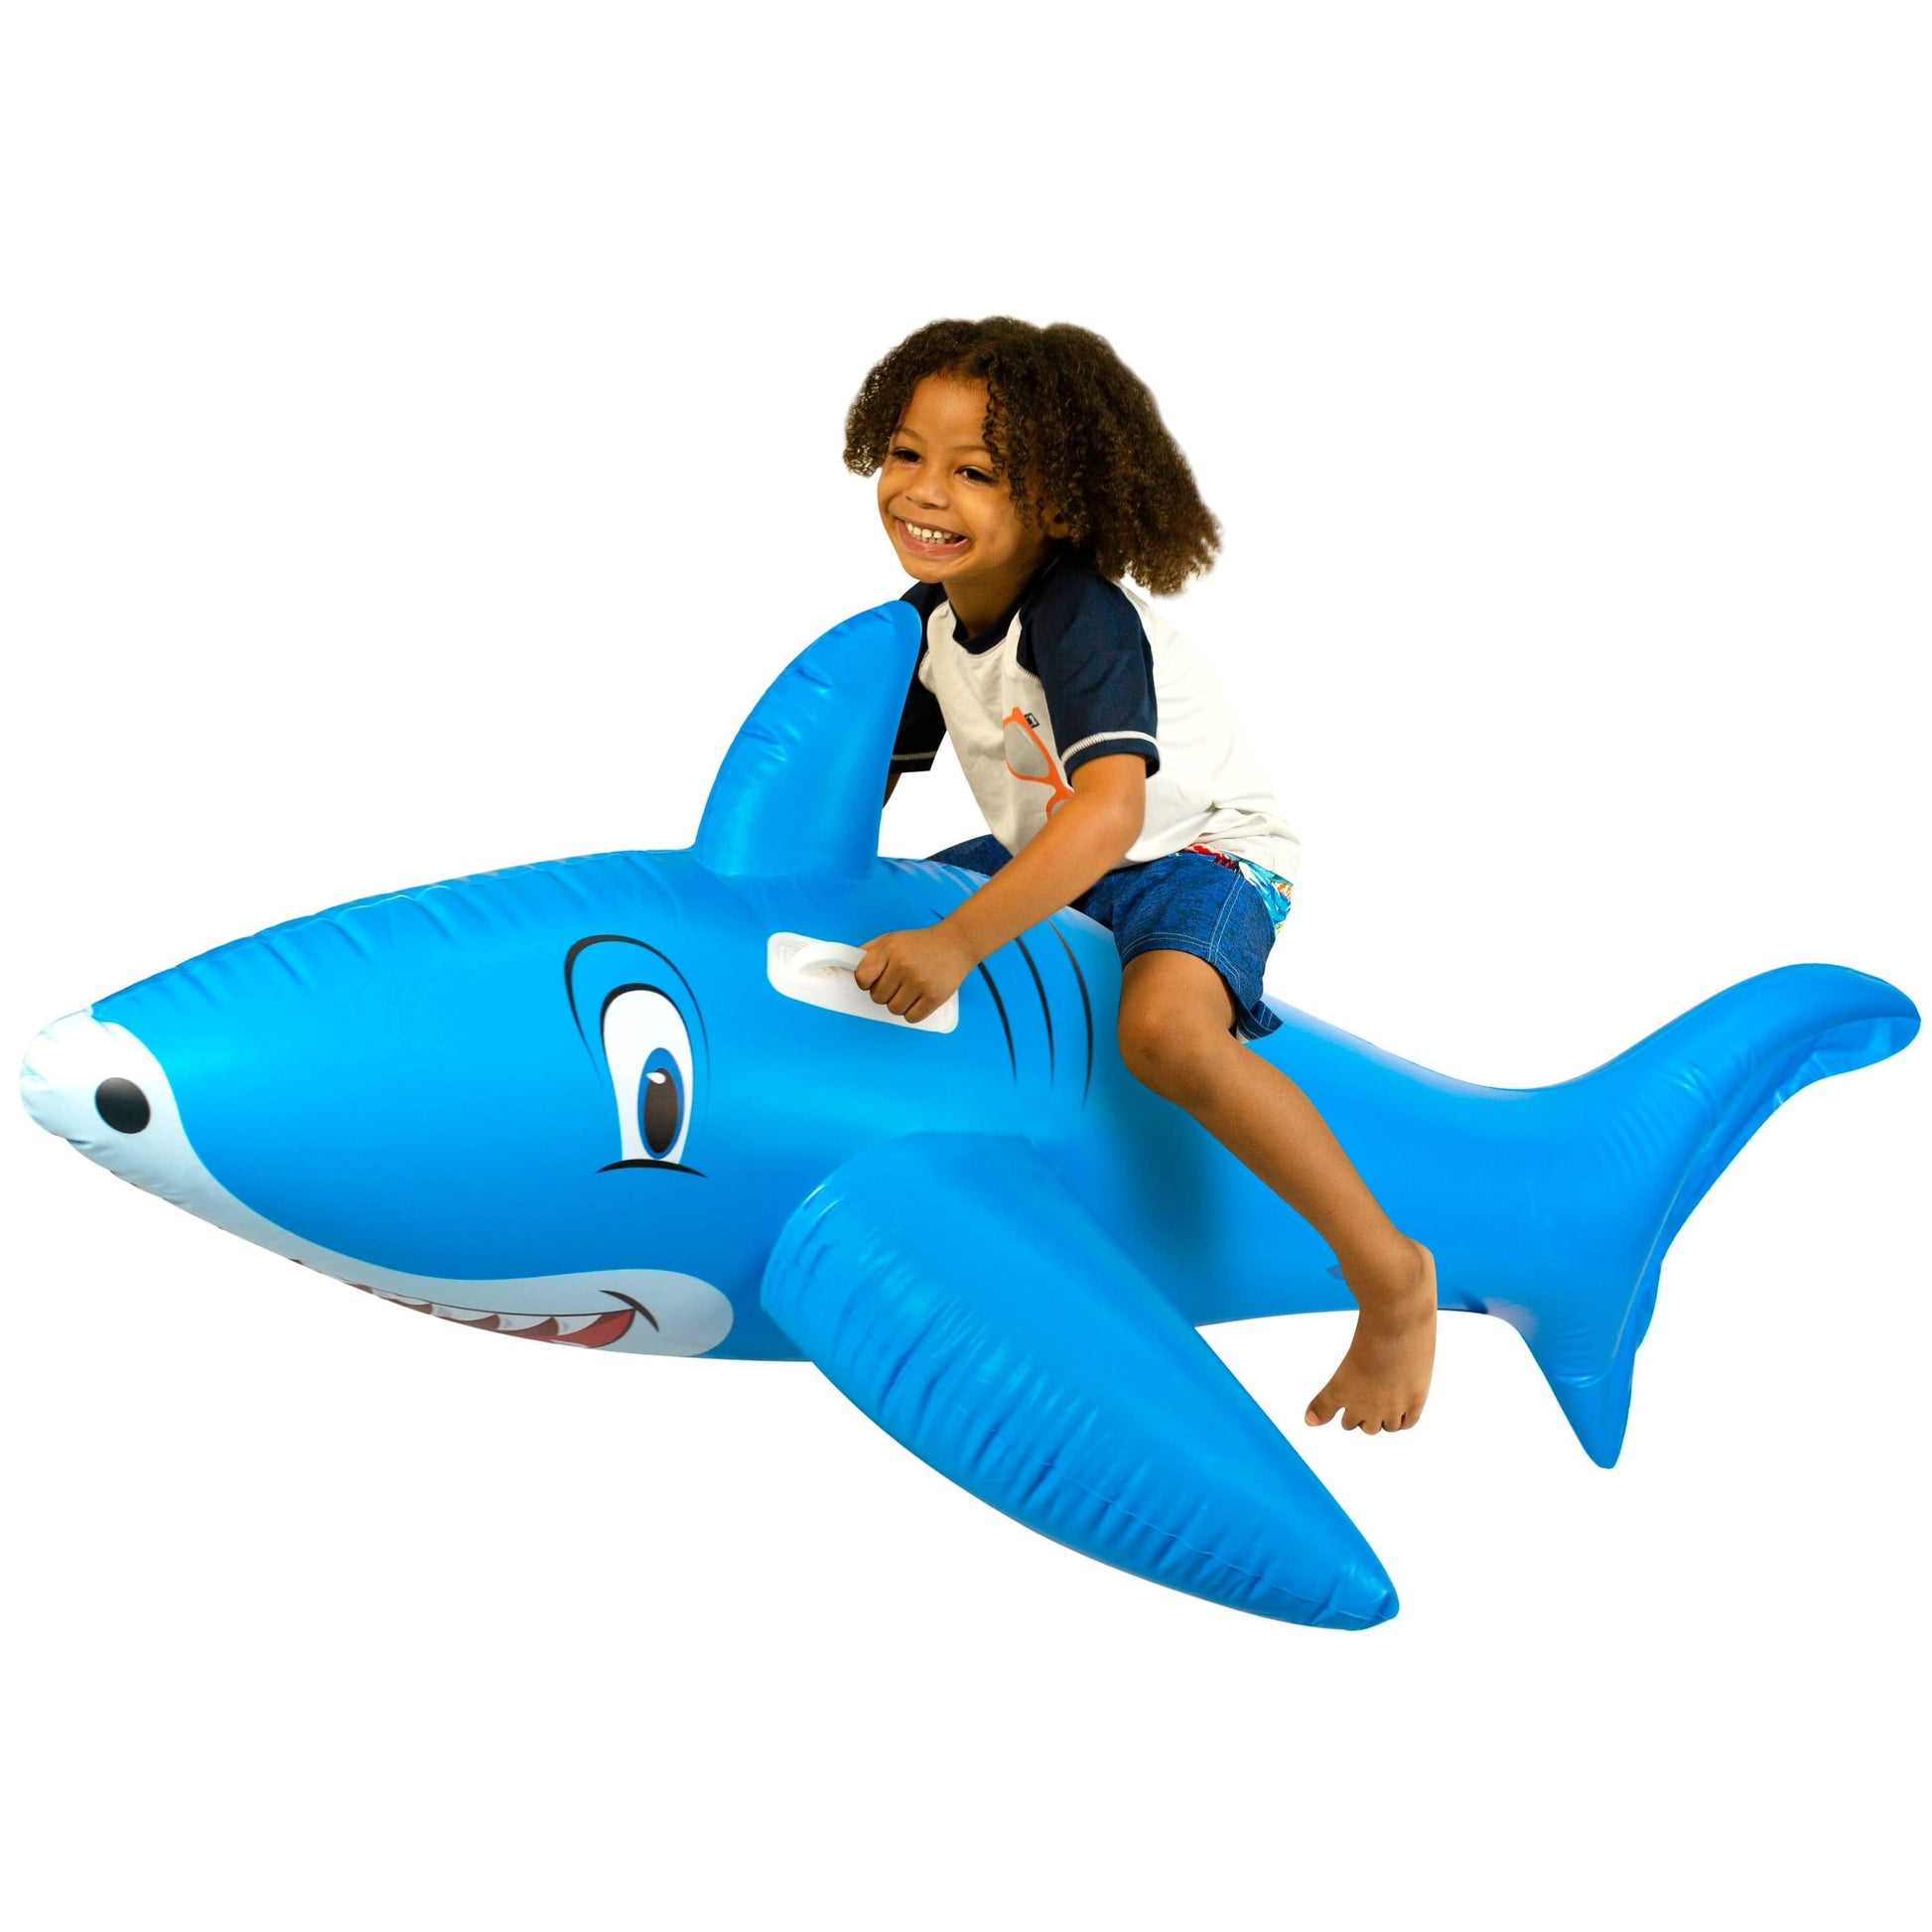 PoolCandy 6 ft Giant Shark Ride-On Inflatable Swimming Pool Float